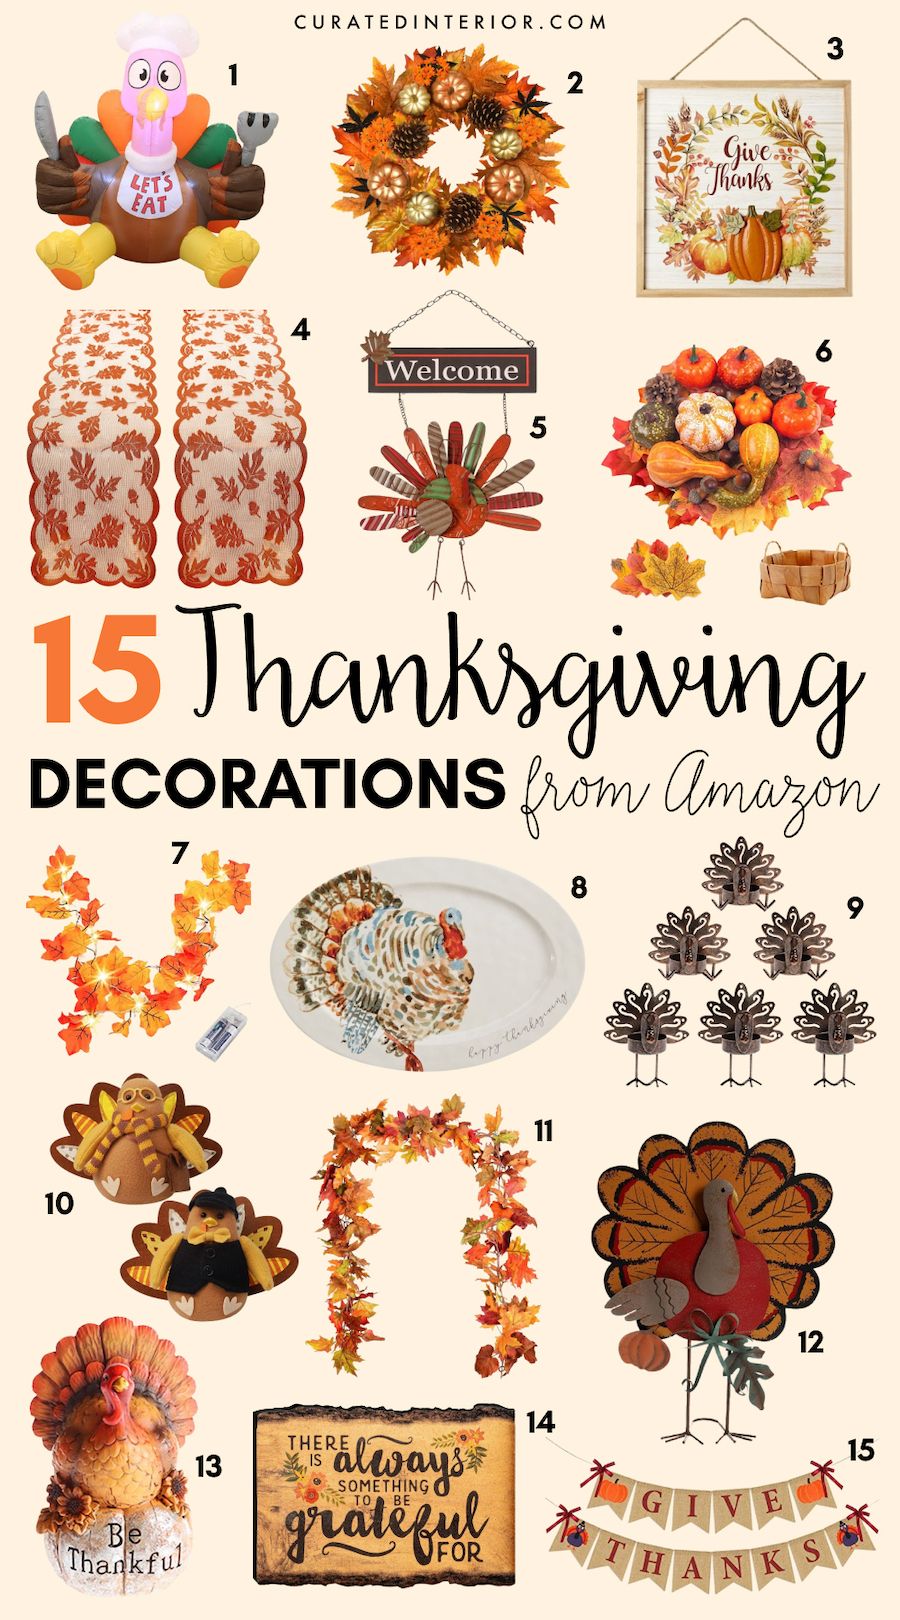 Thanksgiving Decorations from Amazon